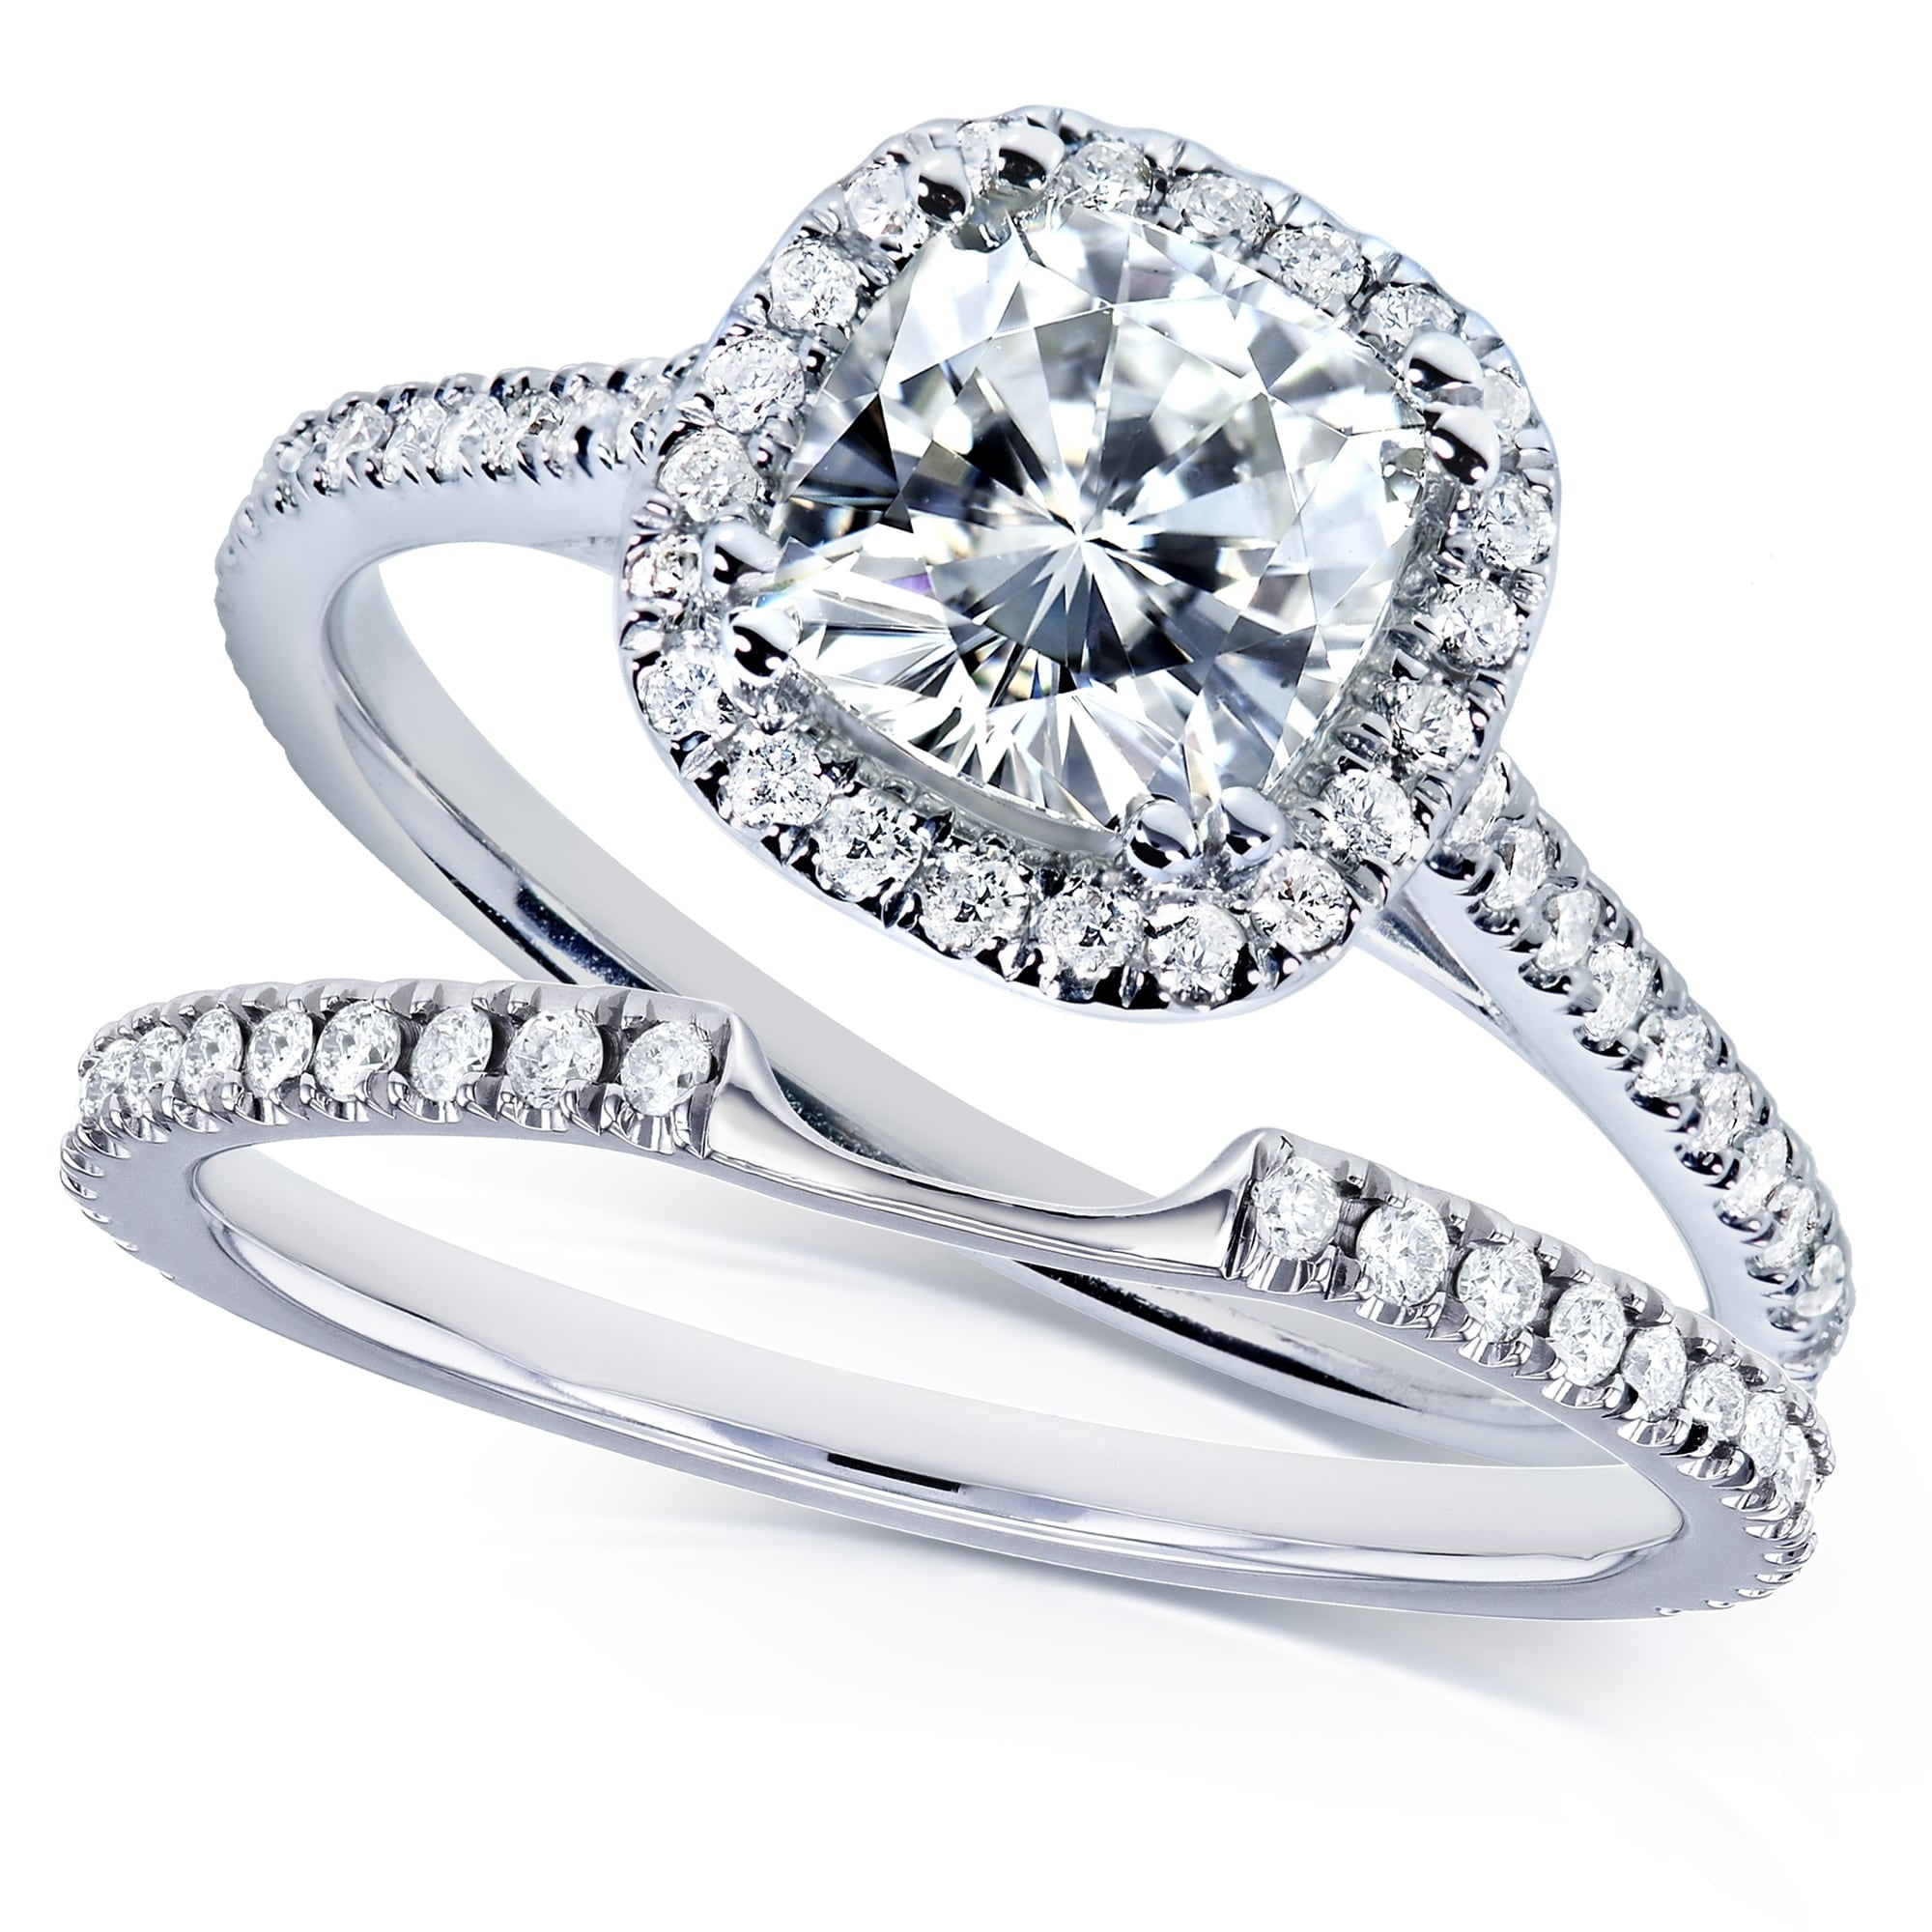 Silver Plated NEW CZ Cushion Cut Ring Set Details about   3 Ct Engagement Ring Set 